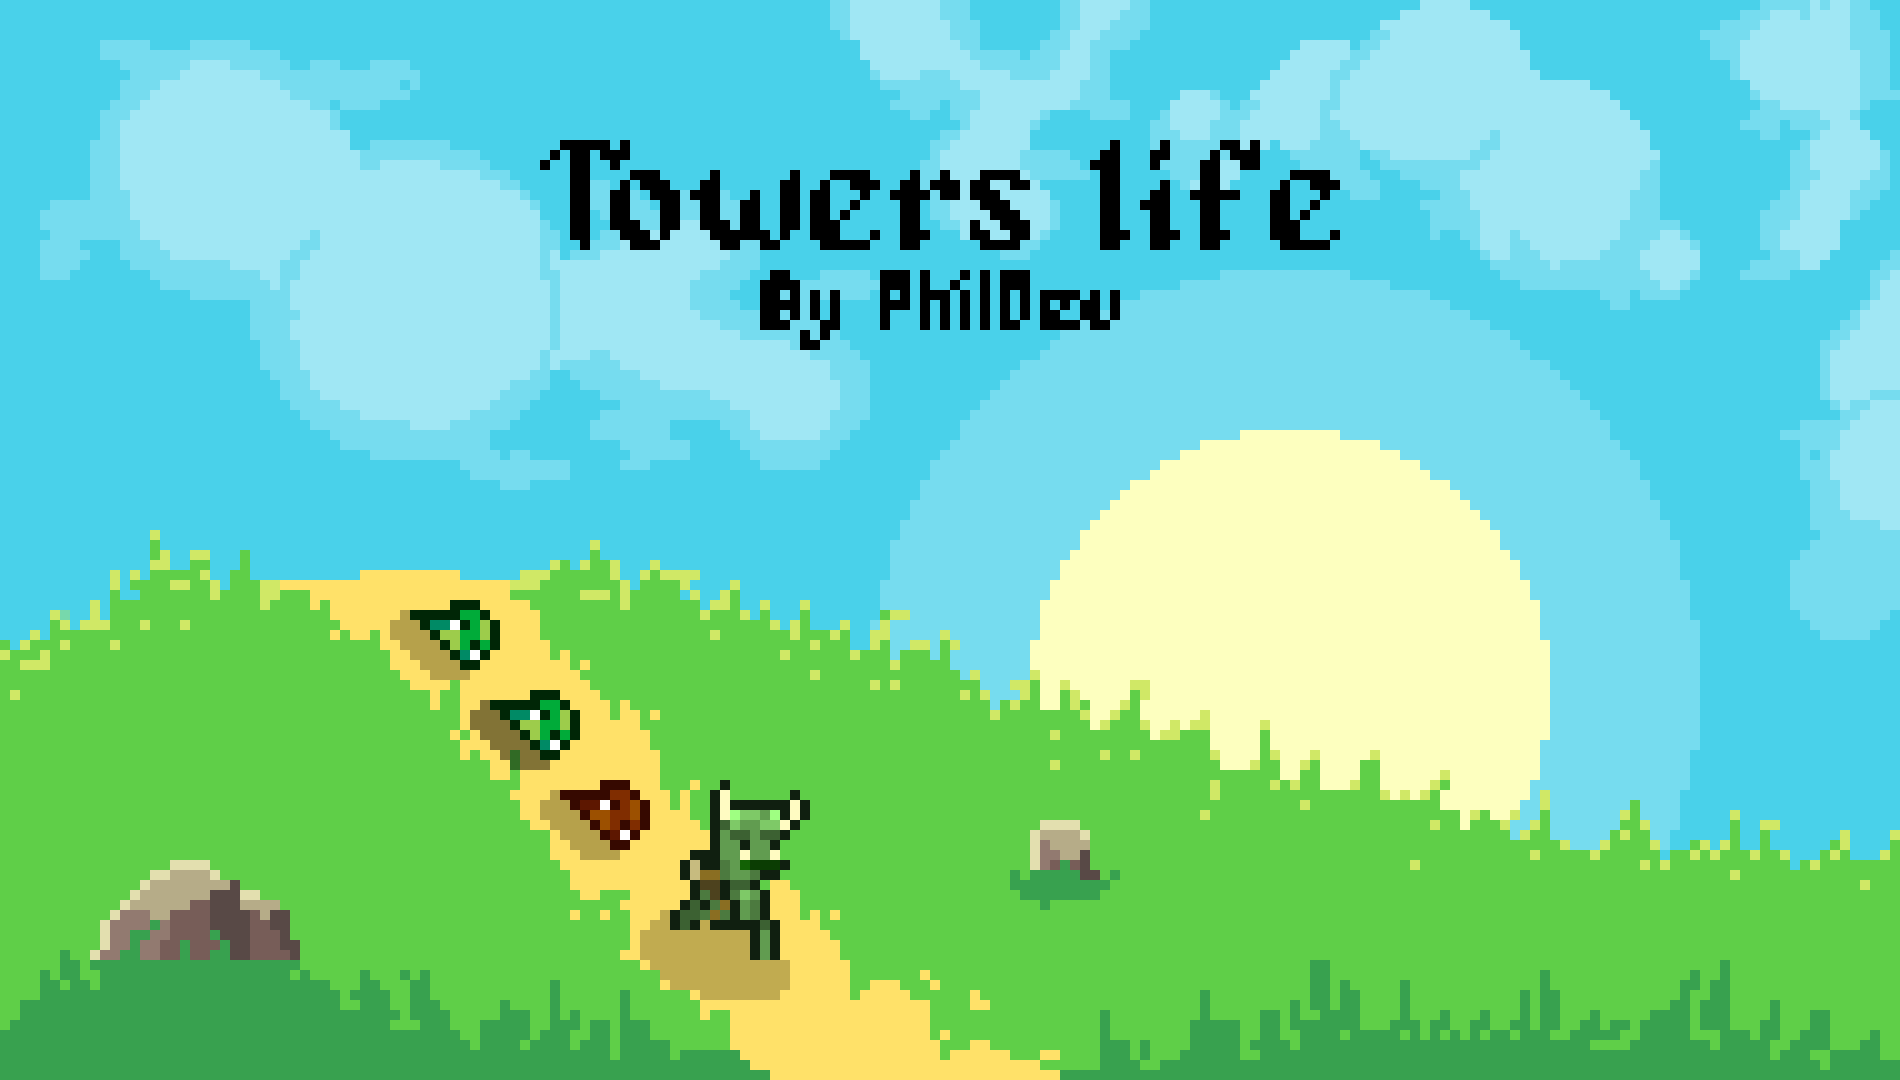 Tower's life